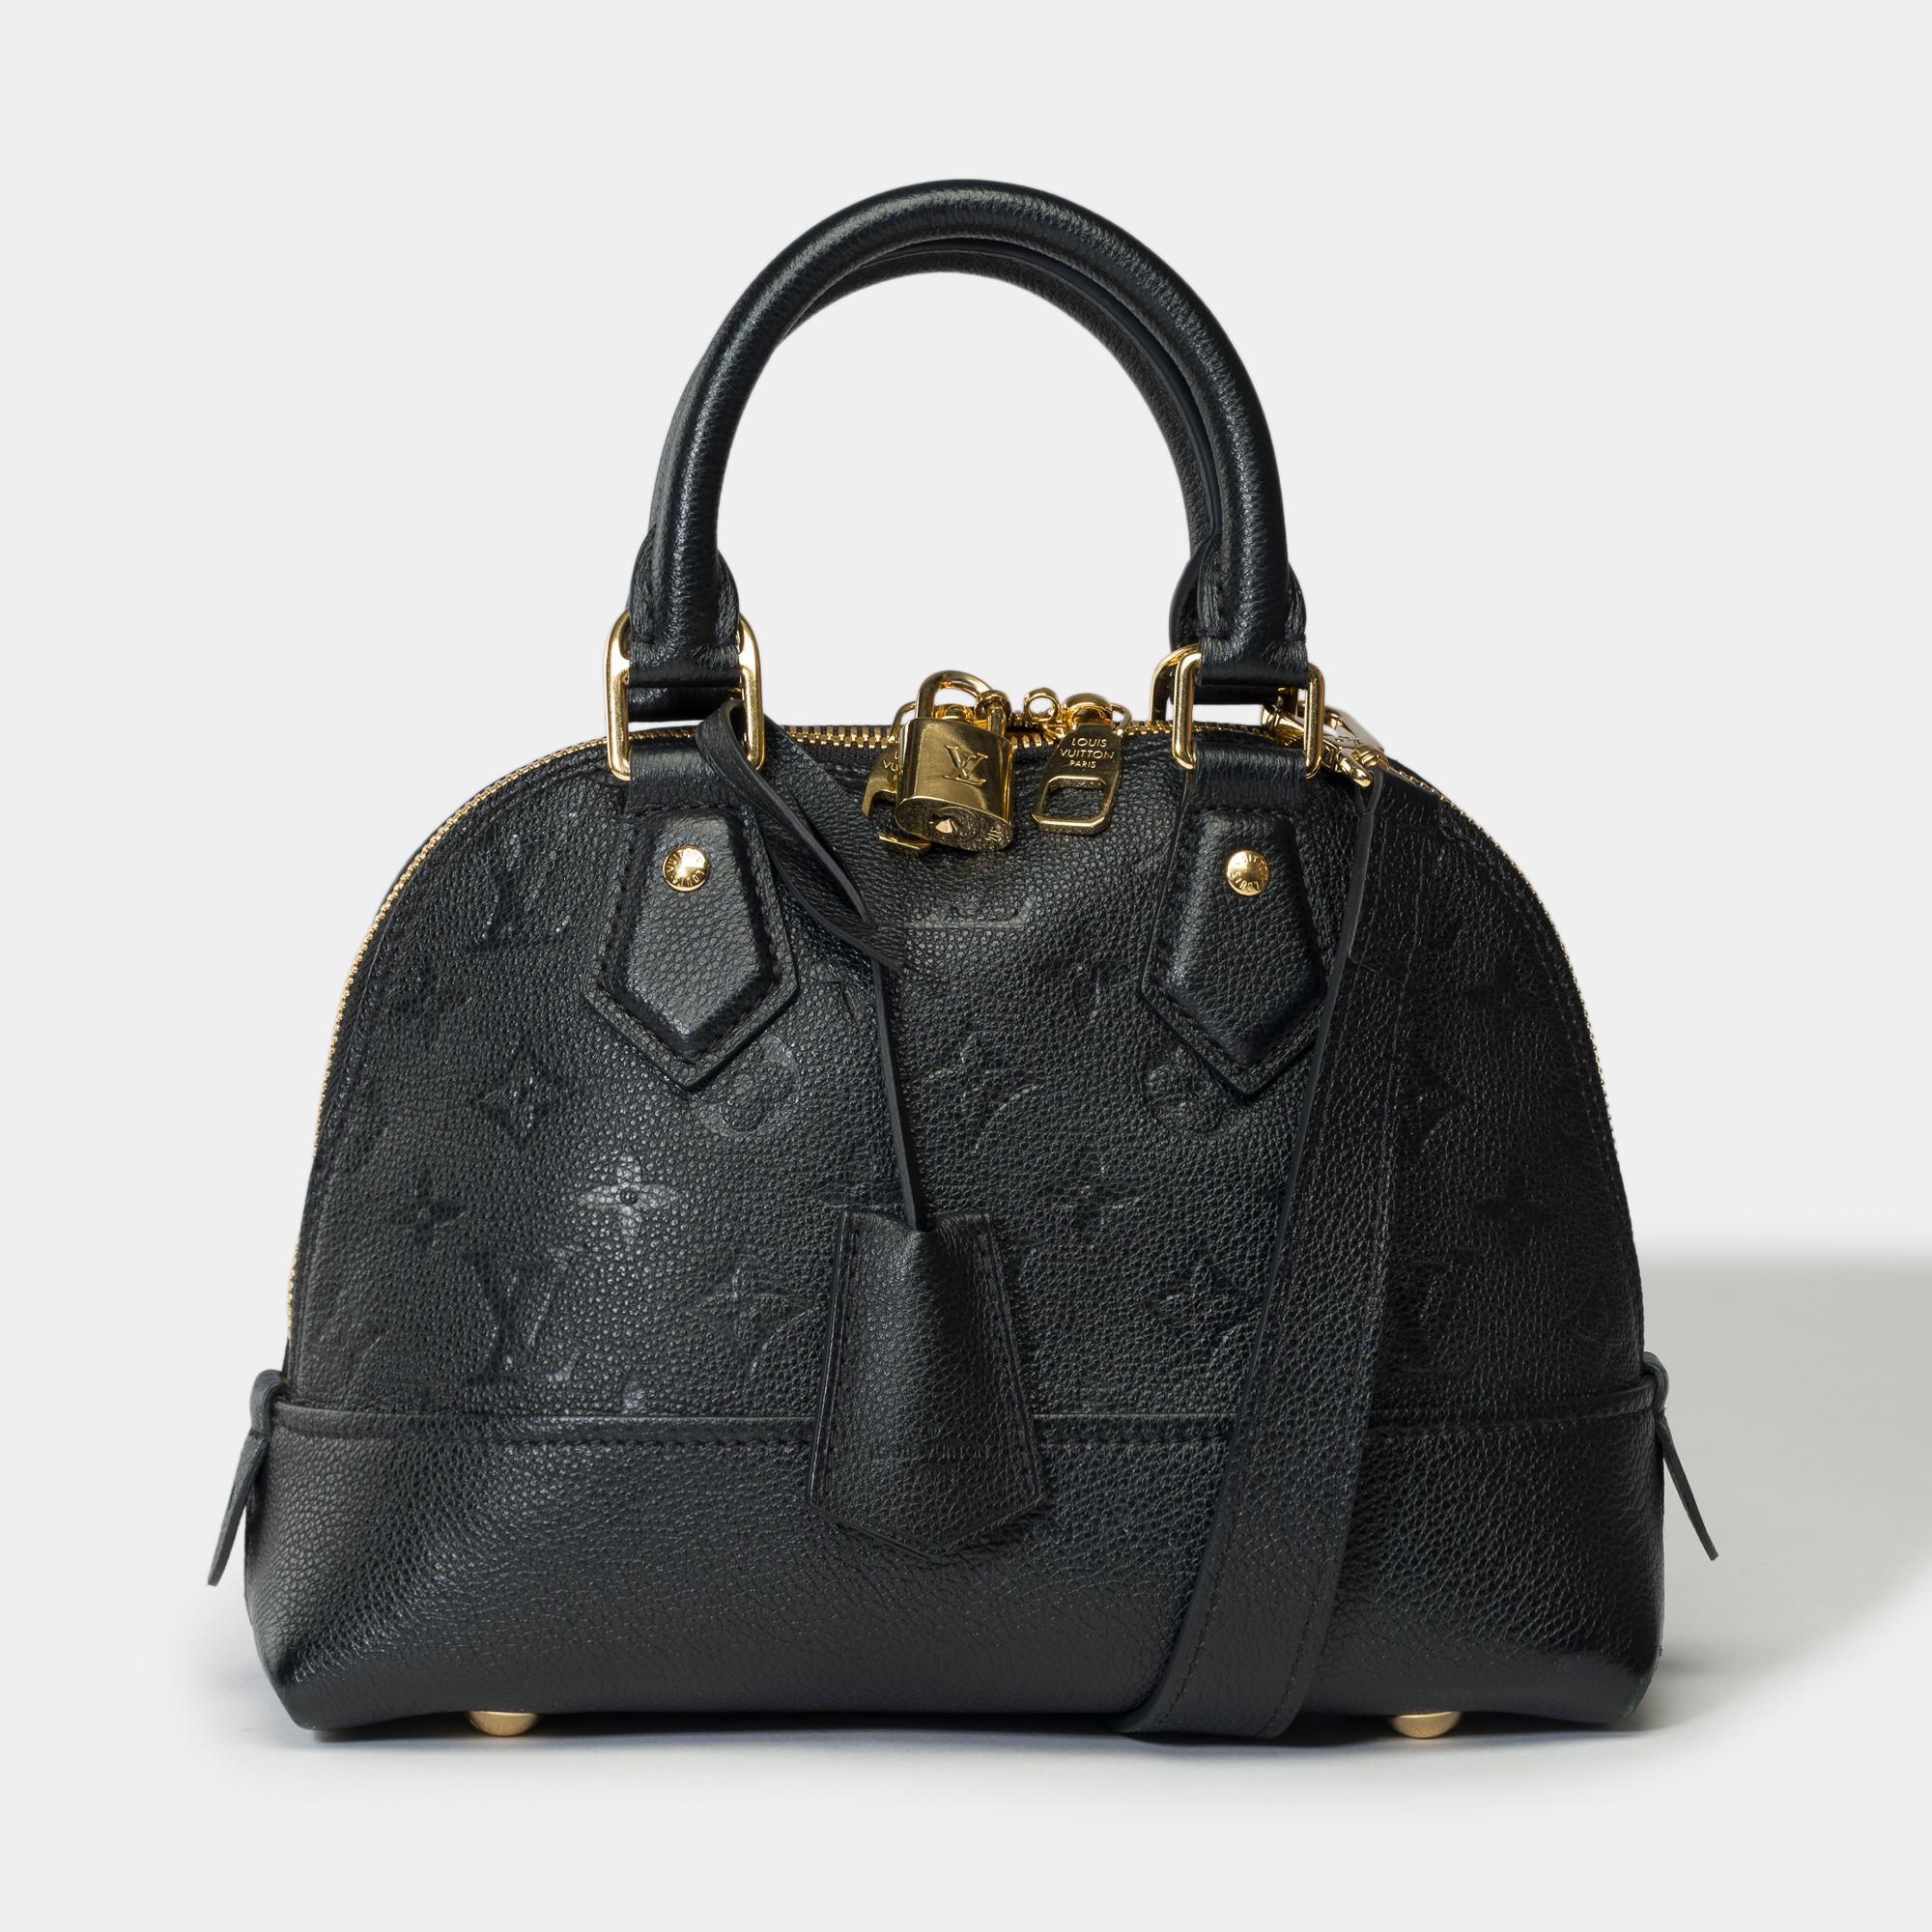 Beautiful​ ​Neo​ ​Alma​ ​PM​ ​handbag​ ​strap​ ​in​ ​black​ ​calf​ ​monogram​ ​leather.​ ​It​ ​has​ ​round​ ​top​ ​handles,​ ​a​ ​removable​ ​bag​ ​shoulder​ ​strap​ ​and​ ​a​ ​bright​ ​contrasting​ ​lining.​ ​Louis​ ​Vuitton’s​ ​iconic​ ​details​